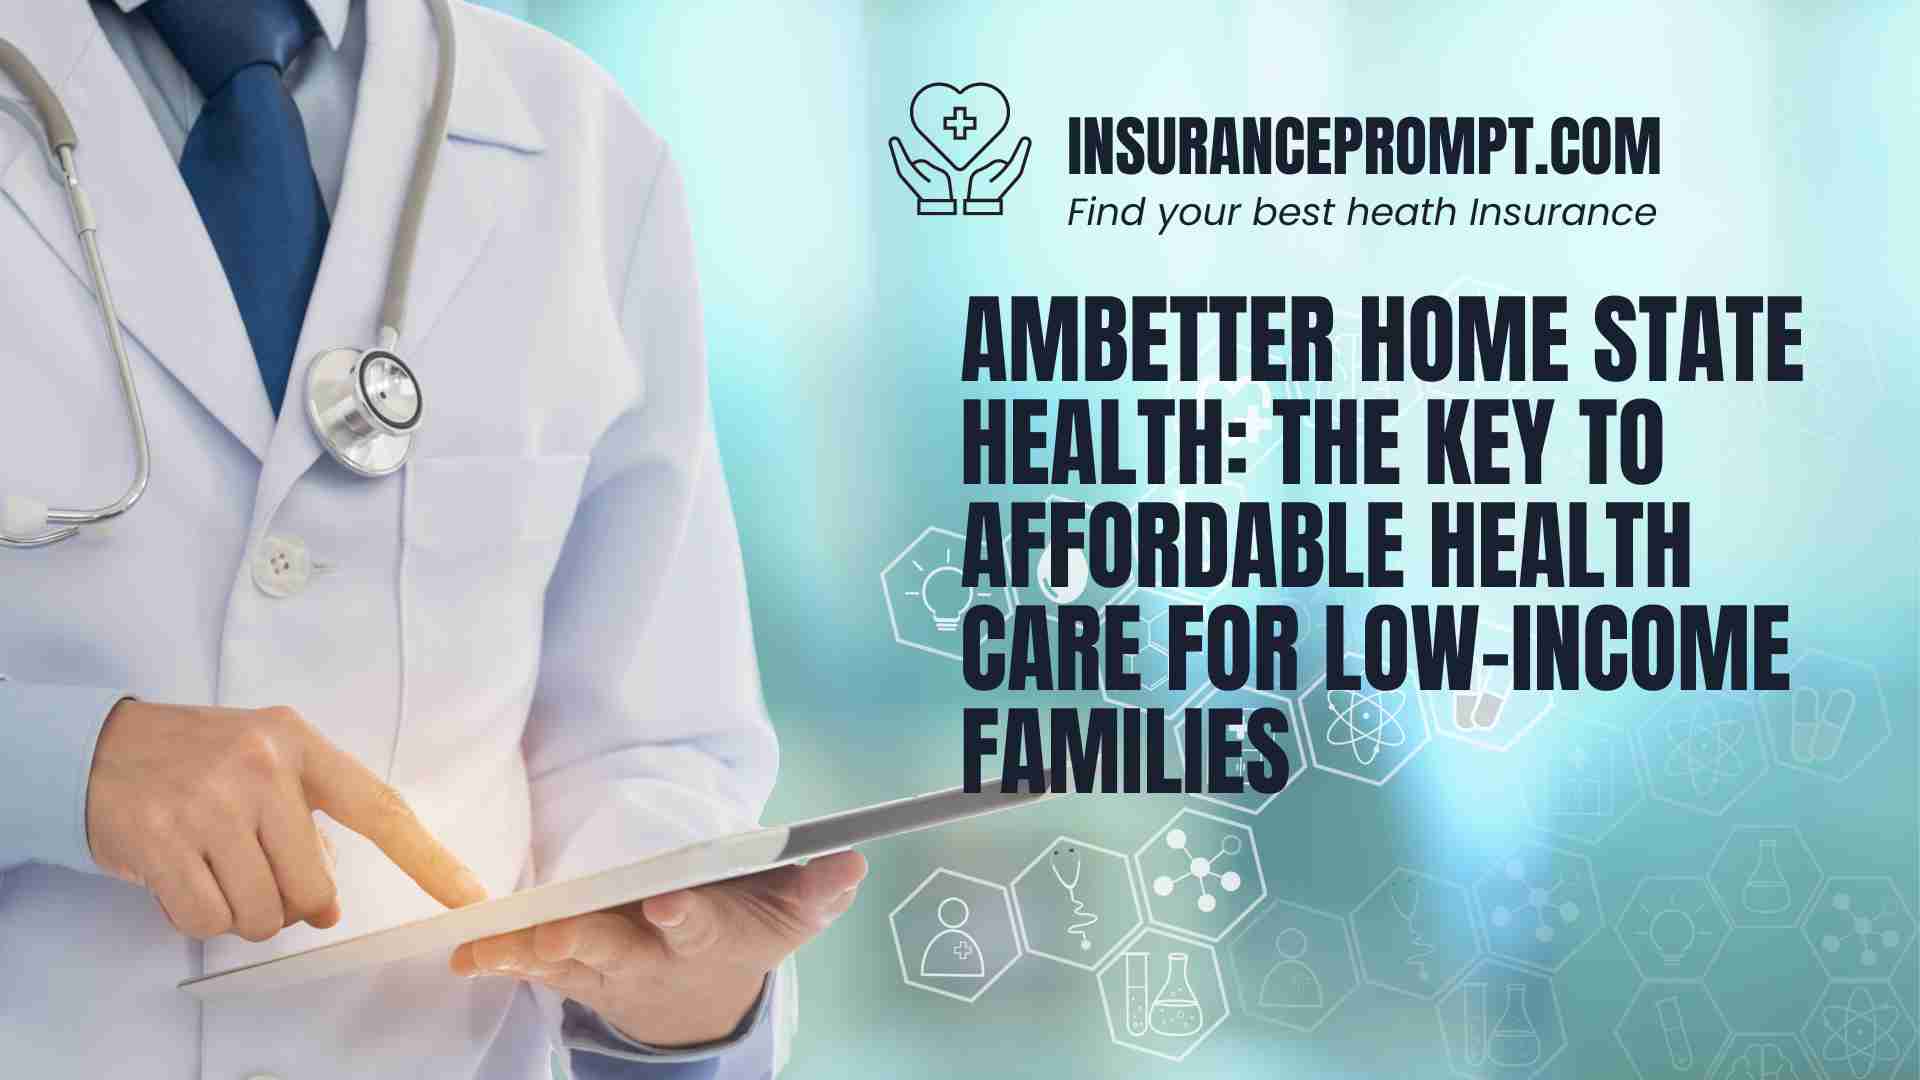 Ambetter Home State Health: Care for Low-Income Families